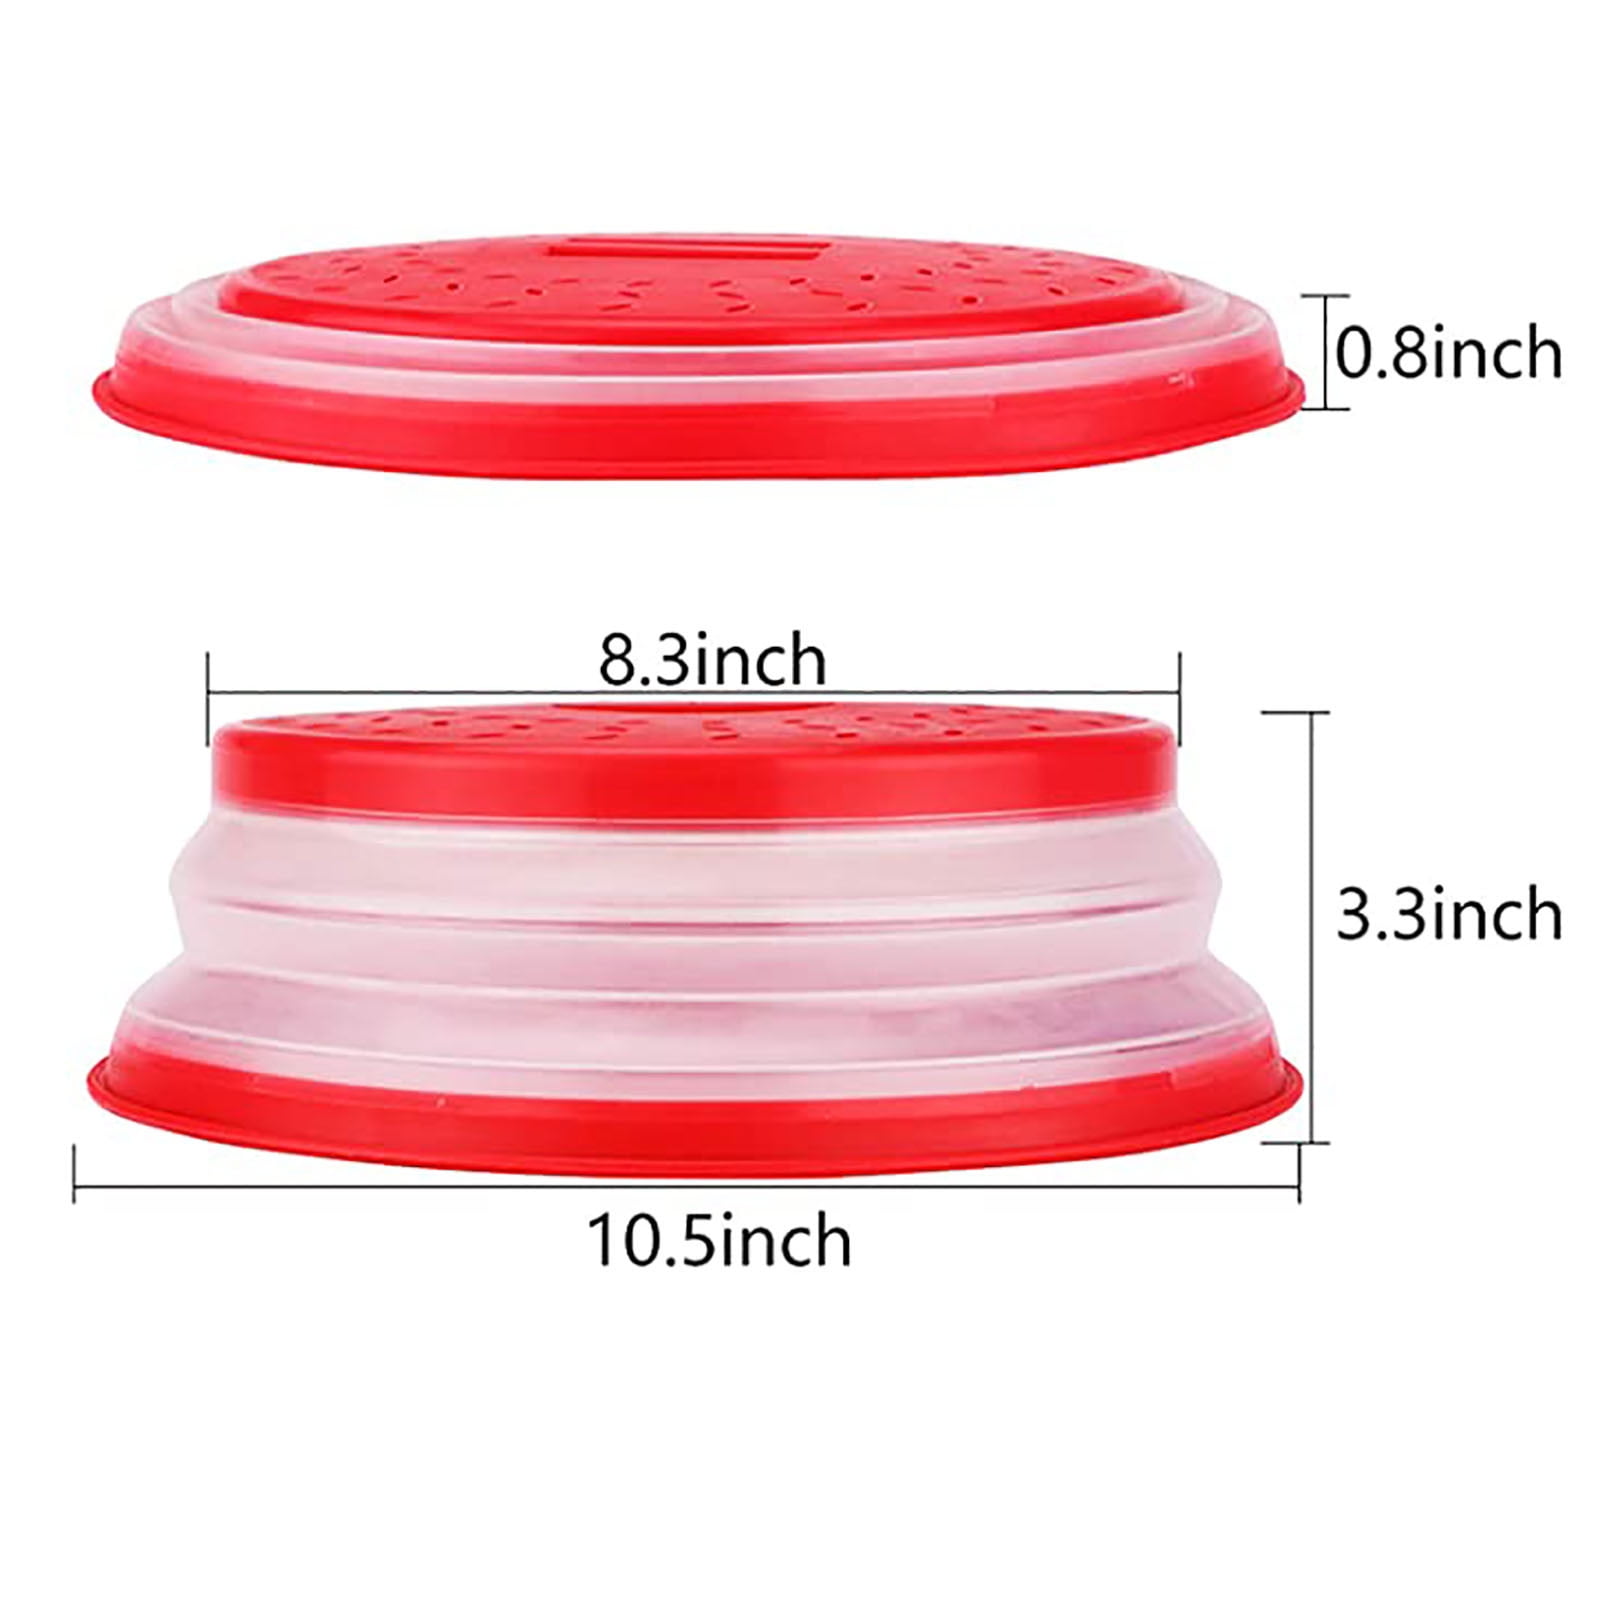 Green 1pc Collapsible Microwave Cover Colander Strainer for Fruit Vegetables Easy Grip Microwave Plate Cover